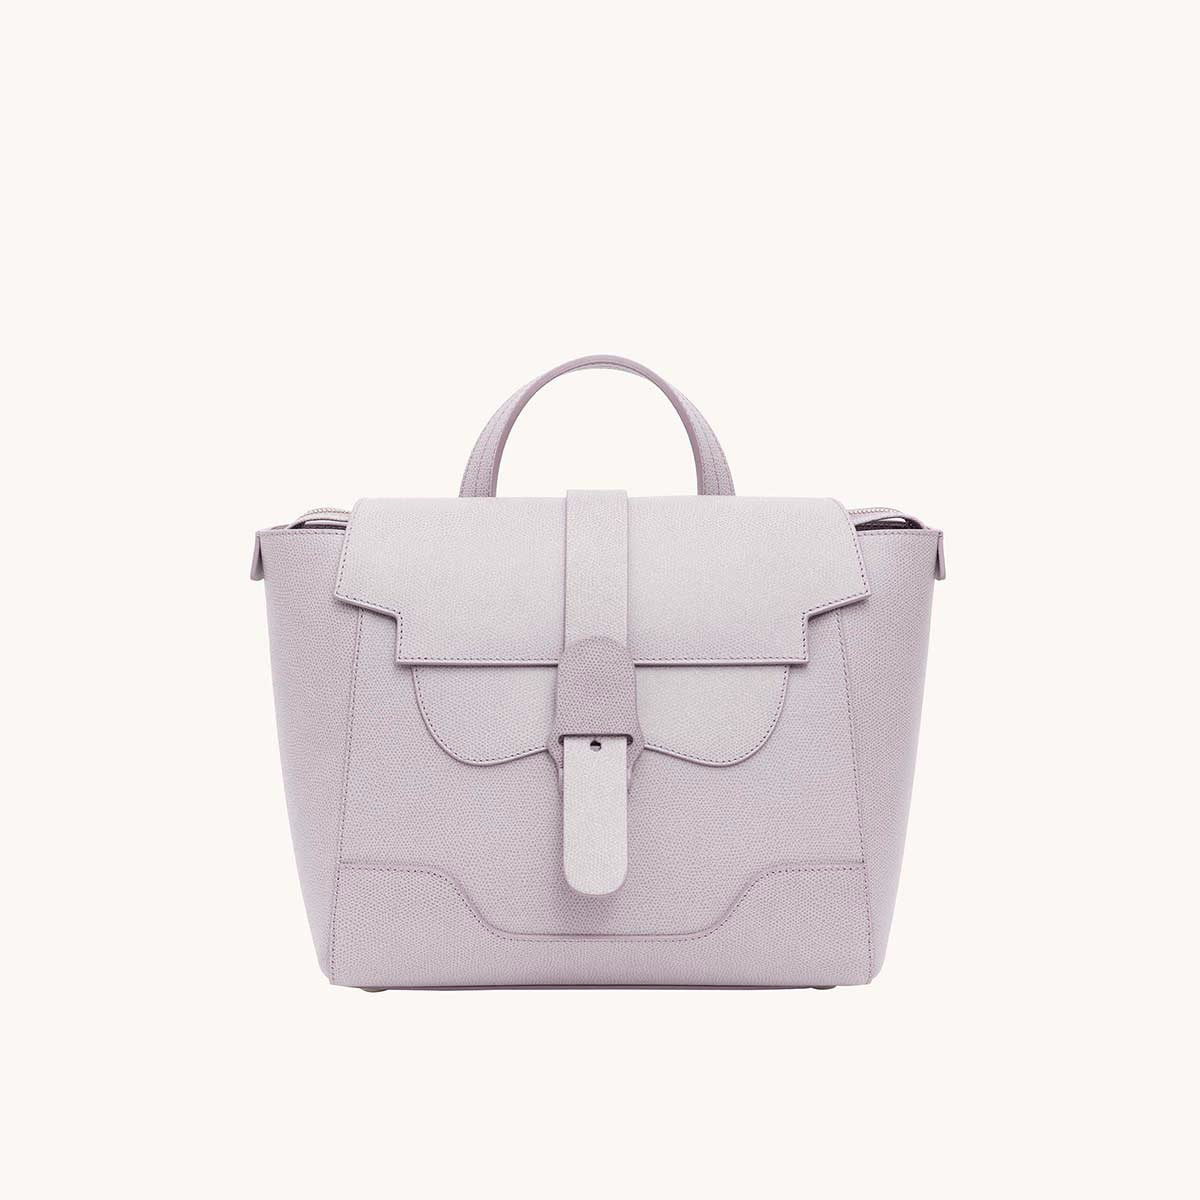 Midi Maestra Bag Pebbled Lavender with Silver Hardware Front View